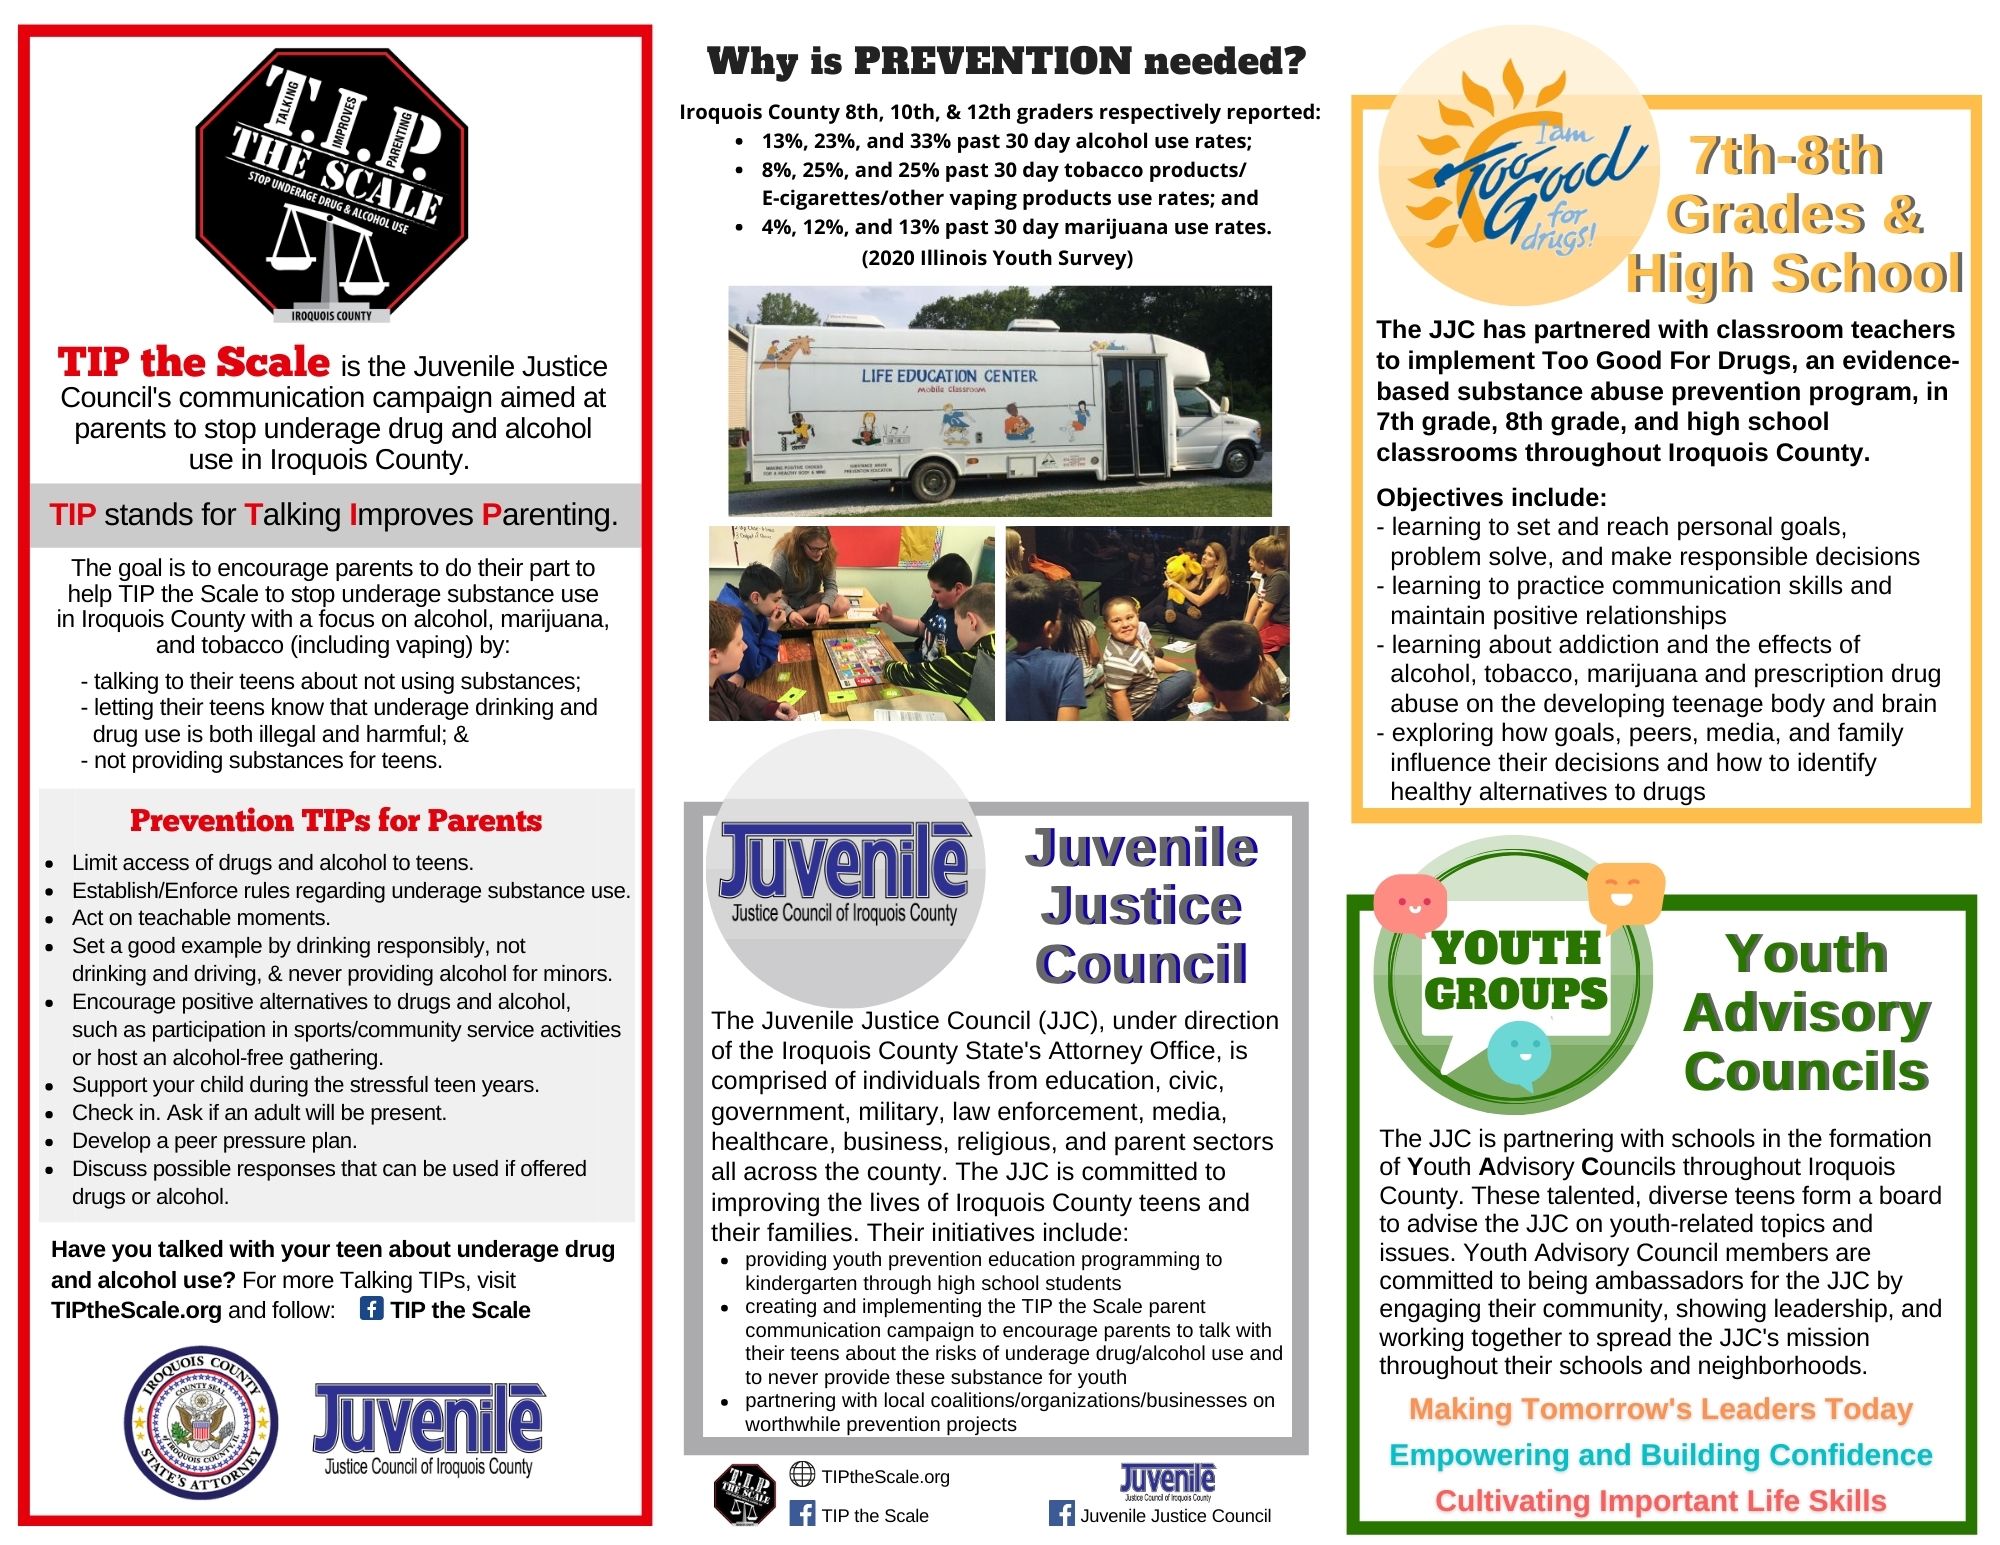 2021 Revised Iroquois County JJCTIPLifeEd Brochure Page 2